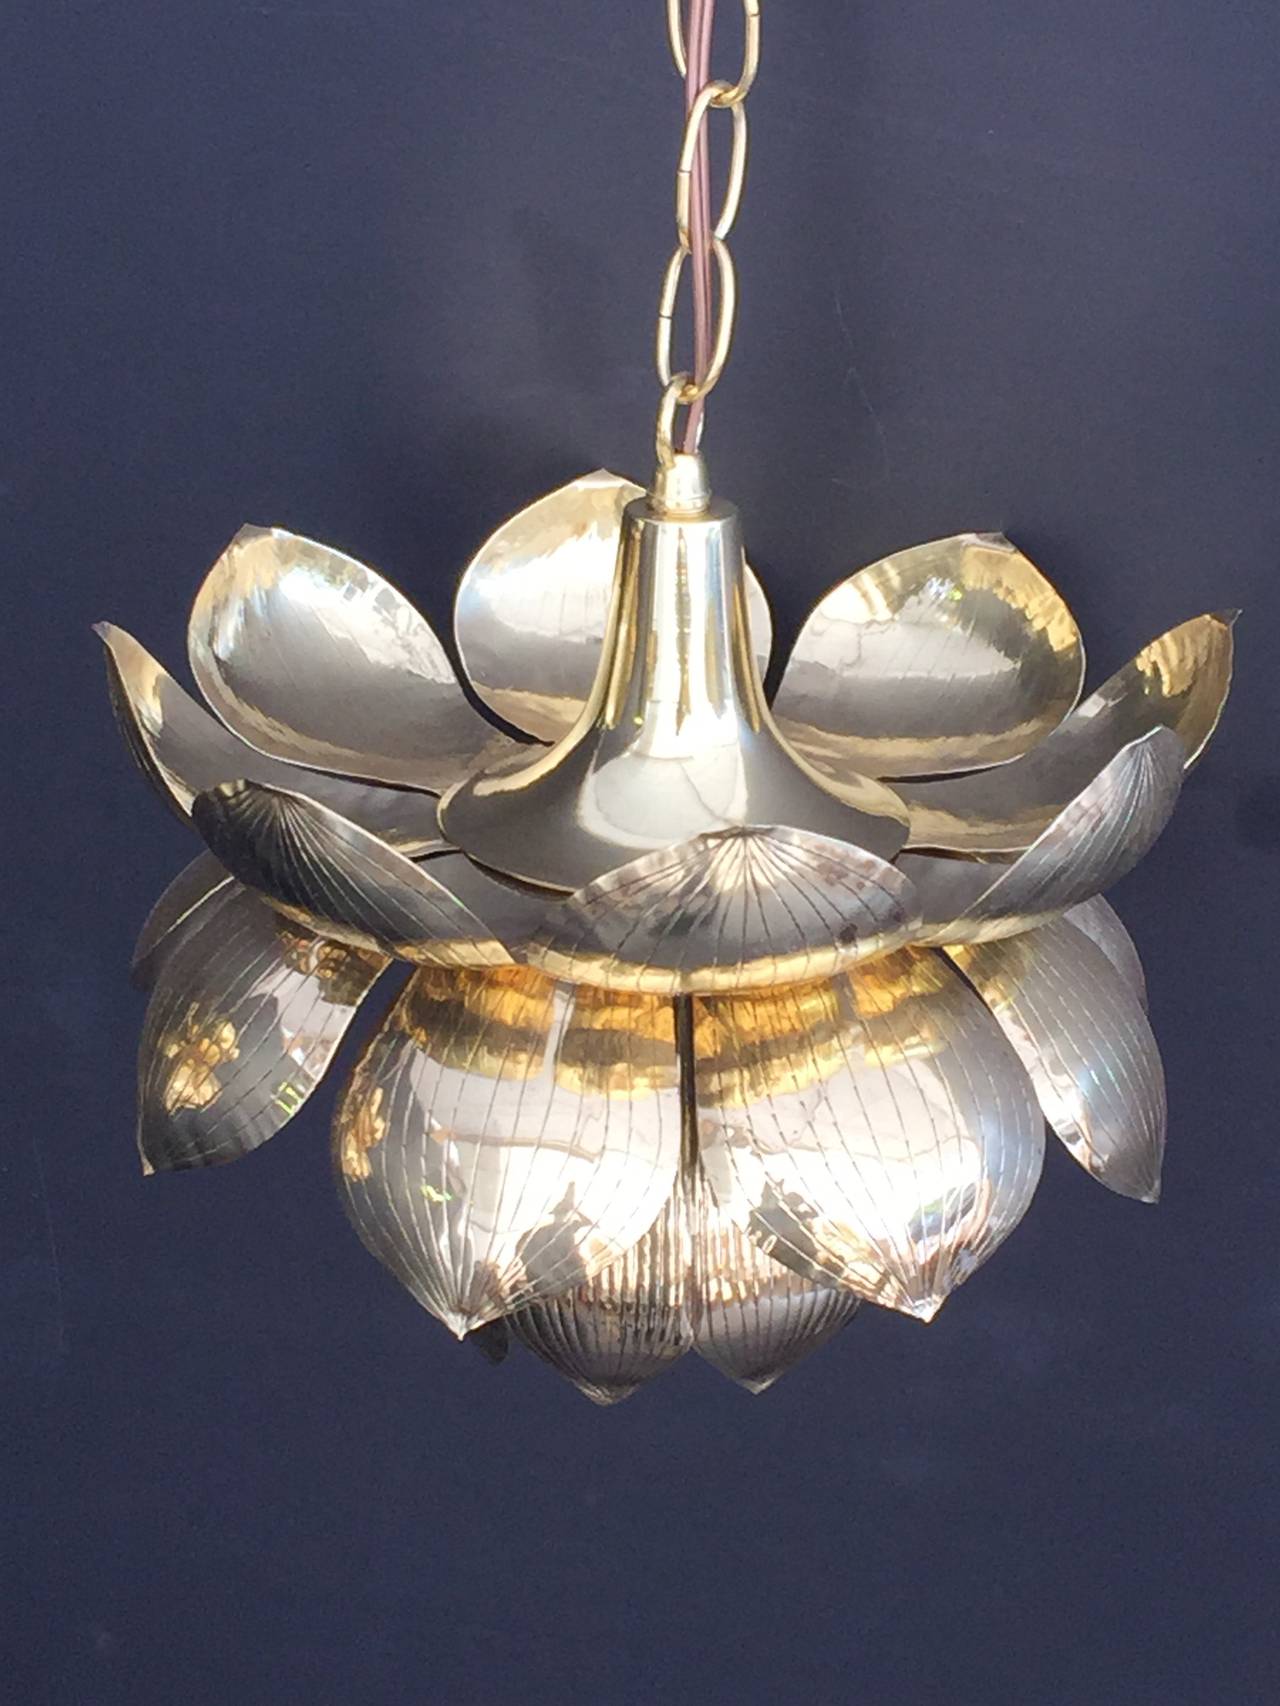 Small brass lotus pendant light by Feldman. Has been newly polished and rewired.
Pendant itself is 10